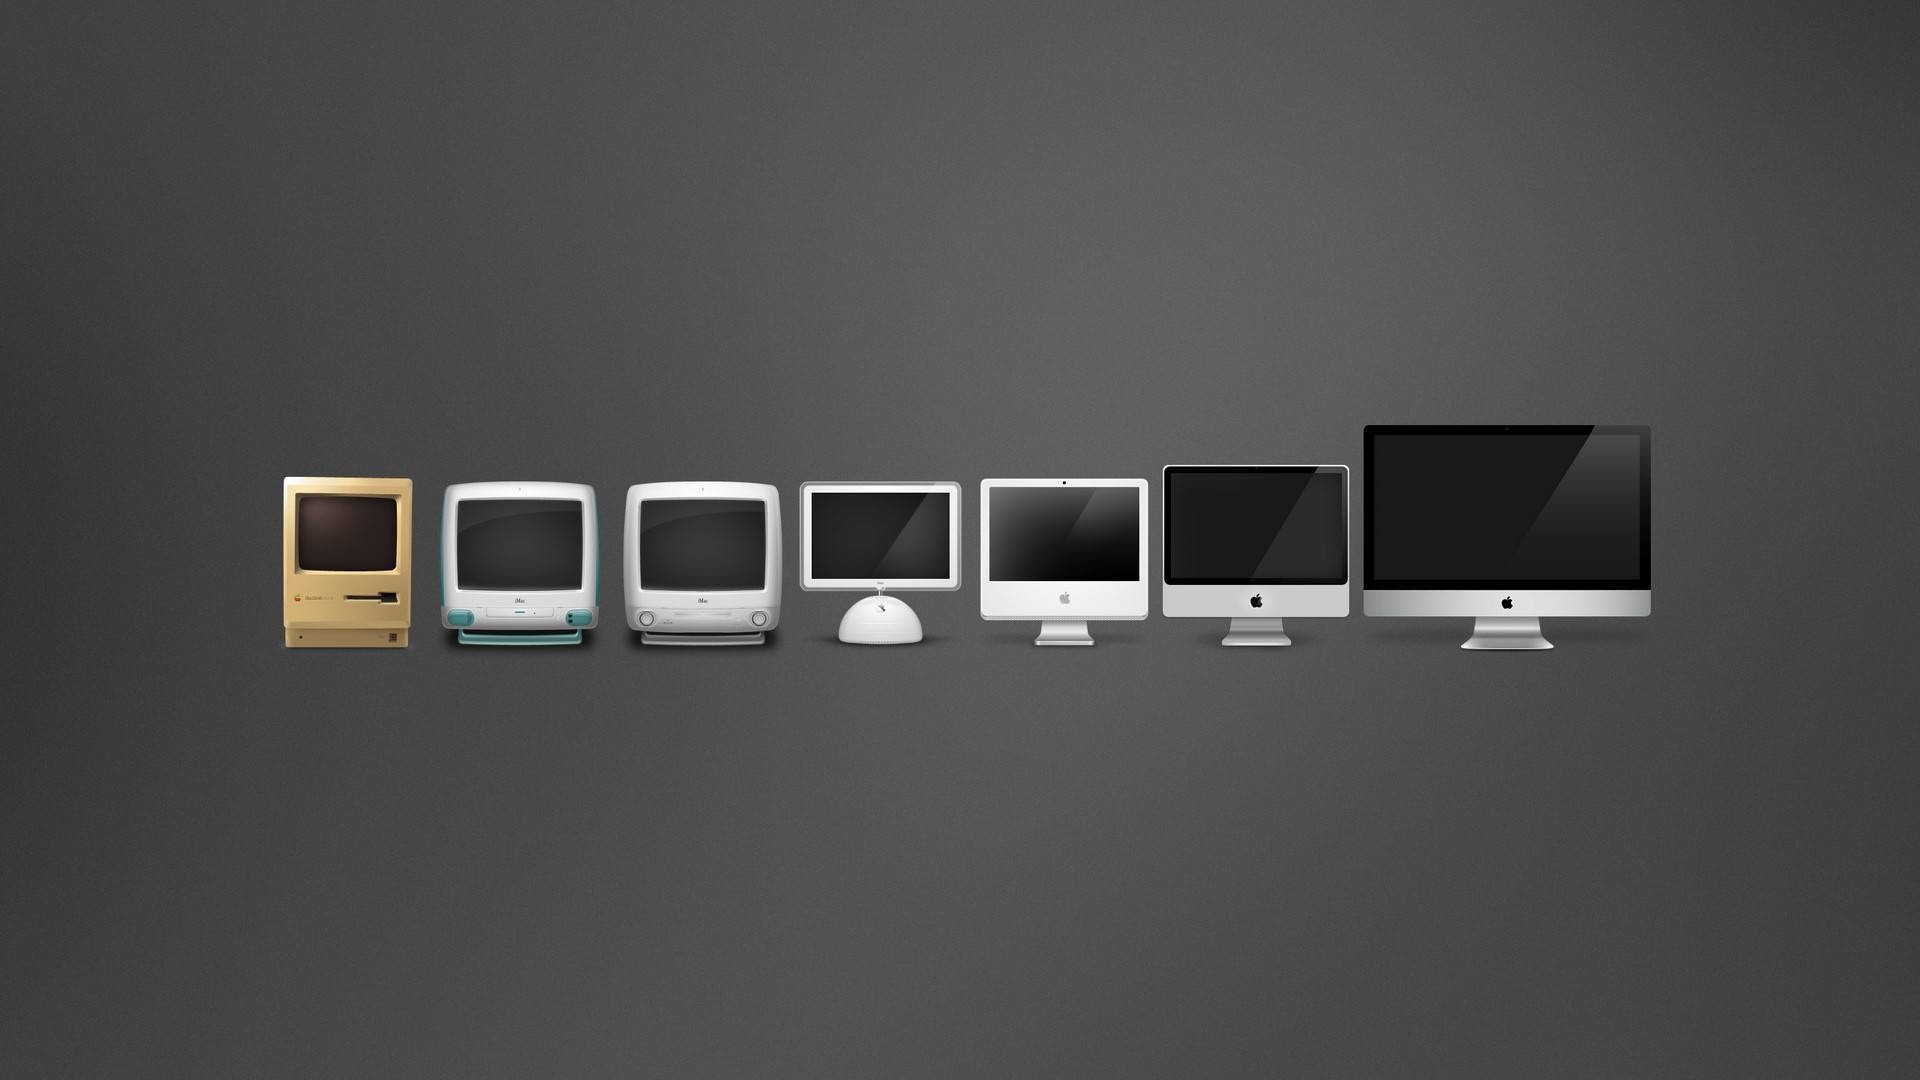 1920x1080 Evolution of Mac (From Lifehack's 100 Awesome Minimalist Wallpapers)